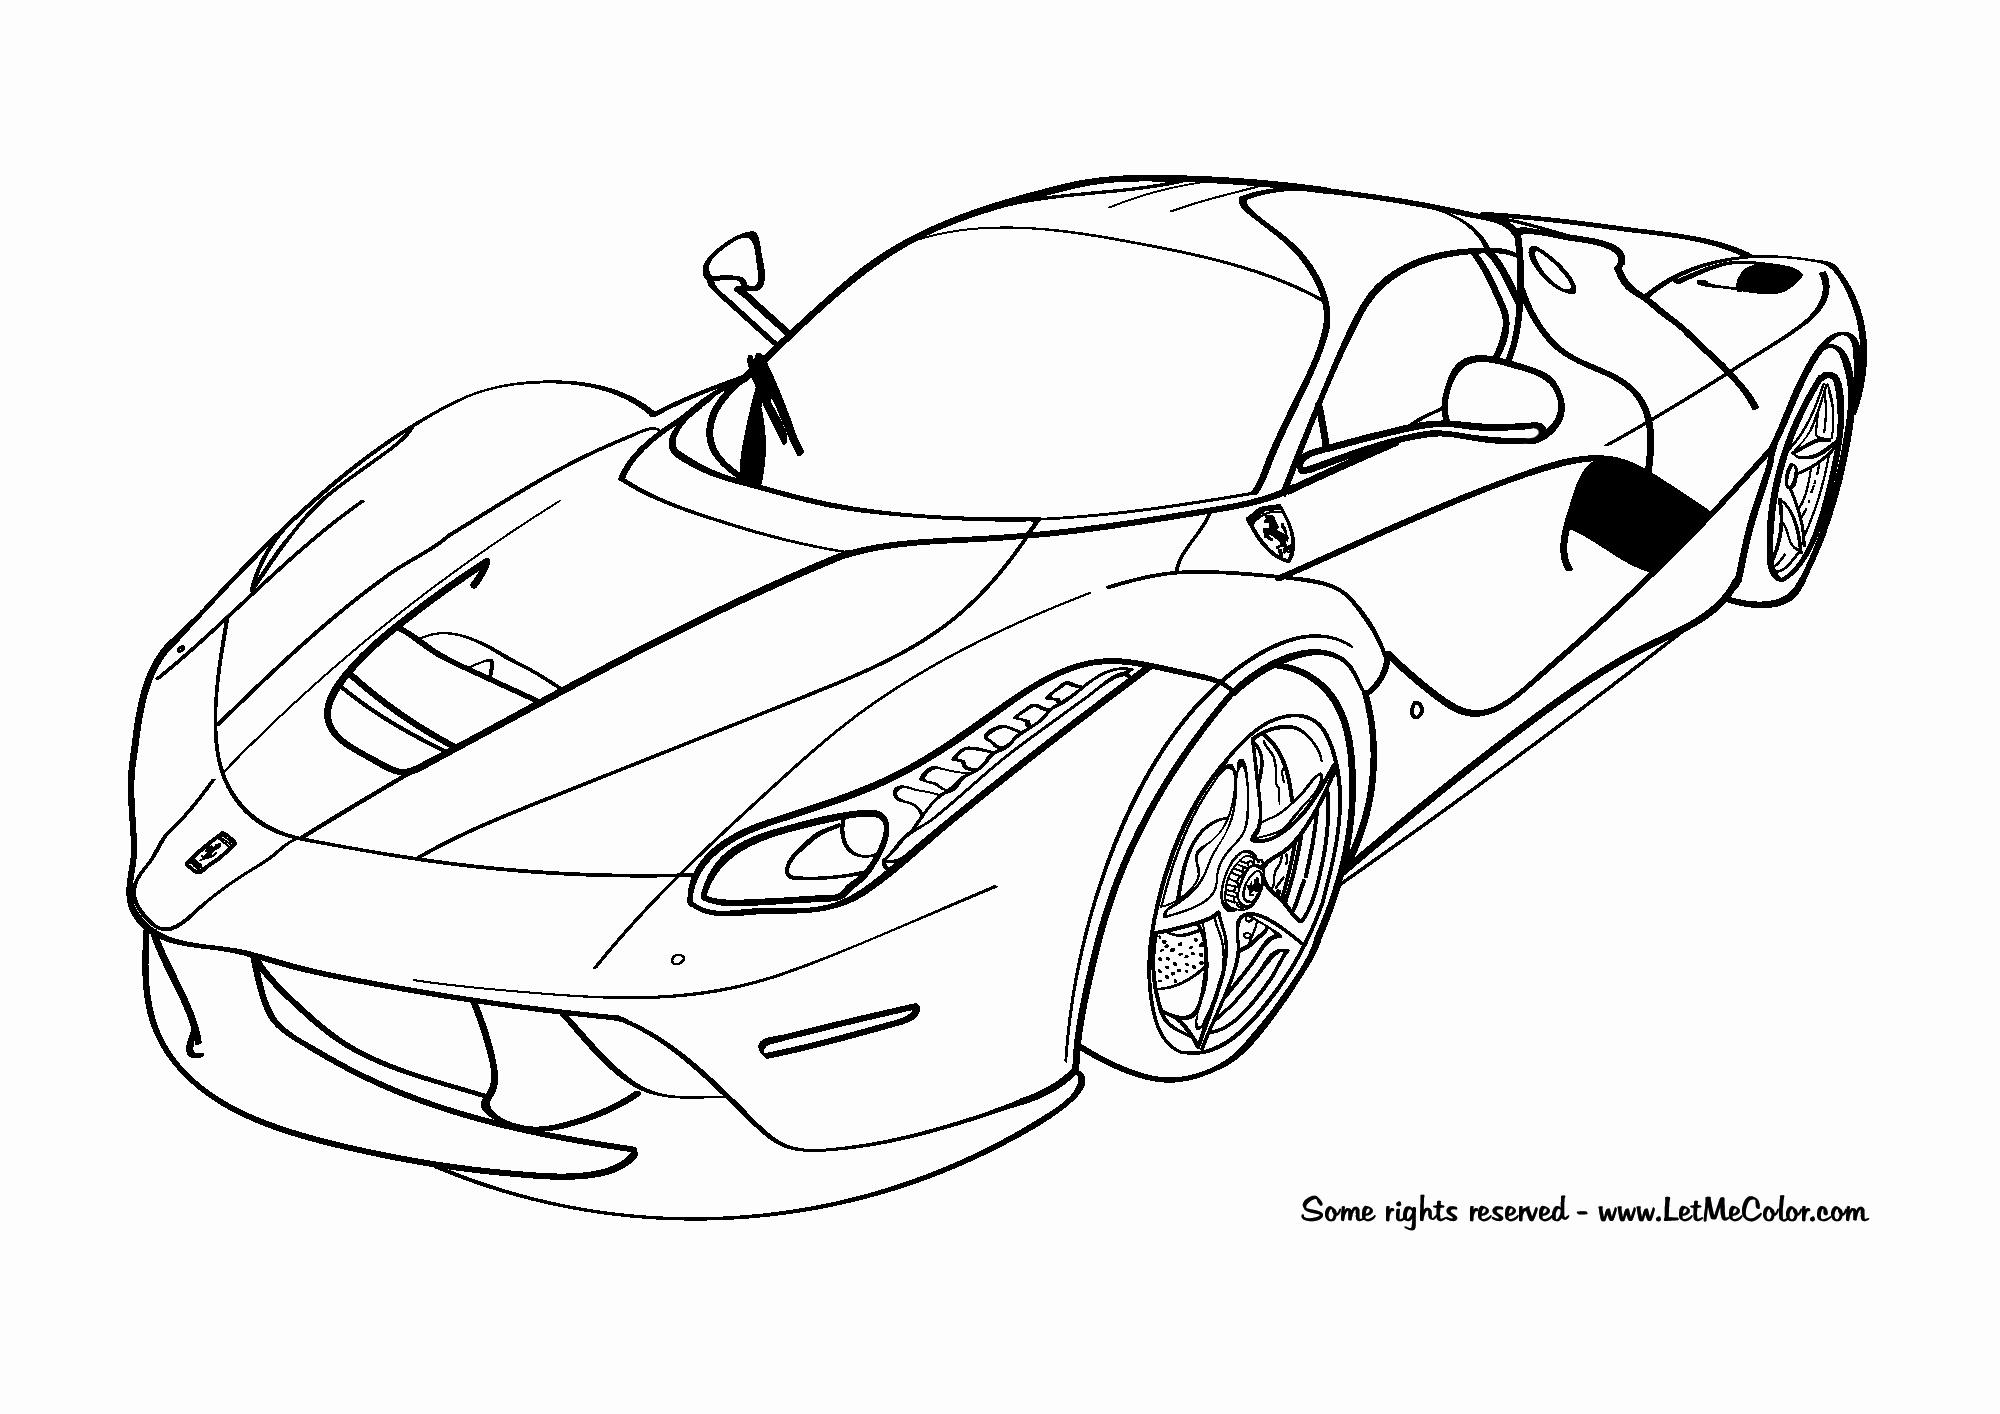 593 Unicorn Supercar Coloring Pages with Printable